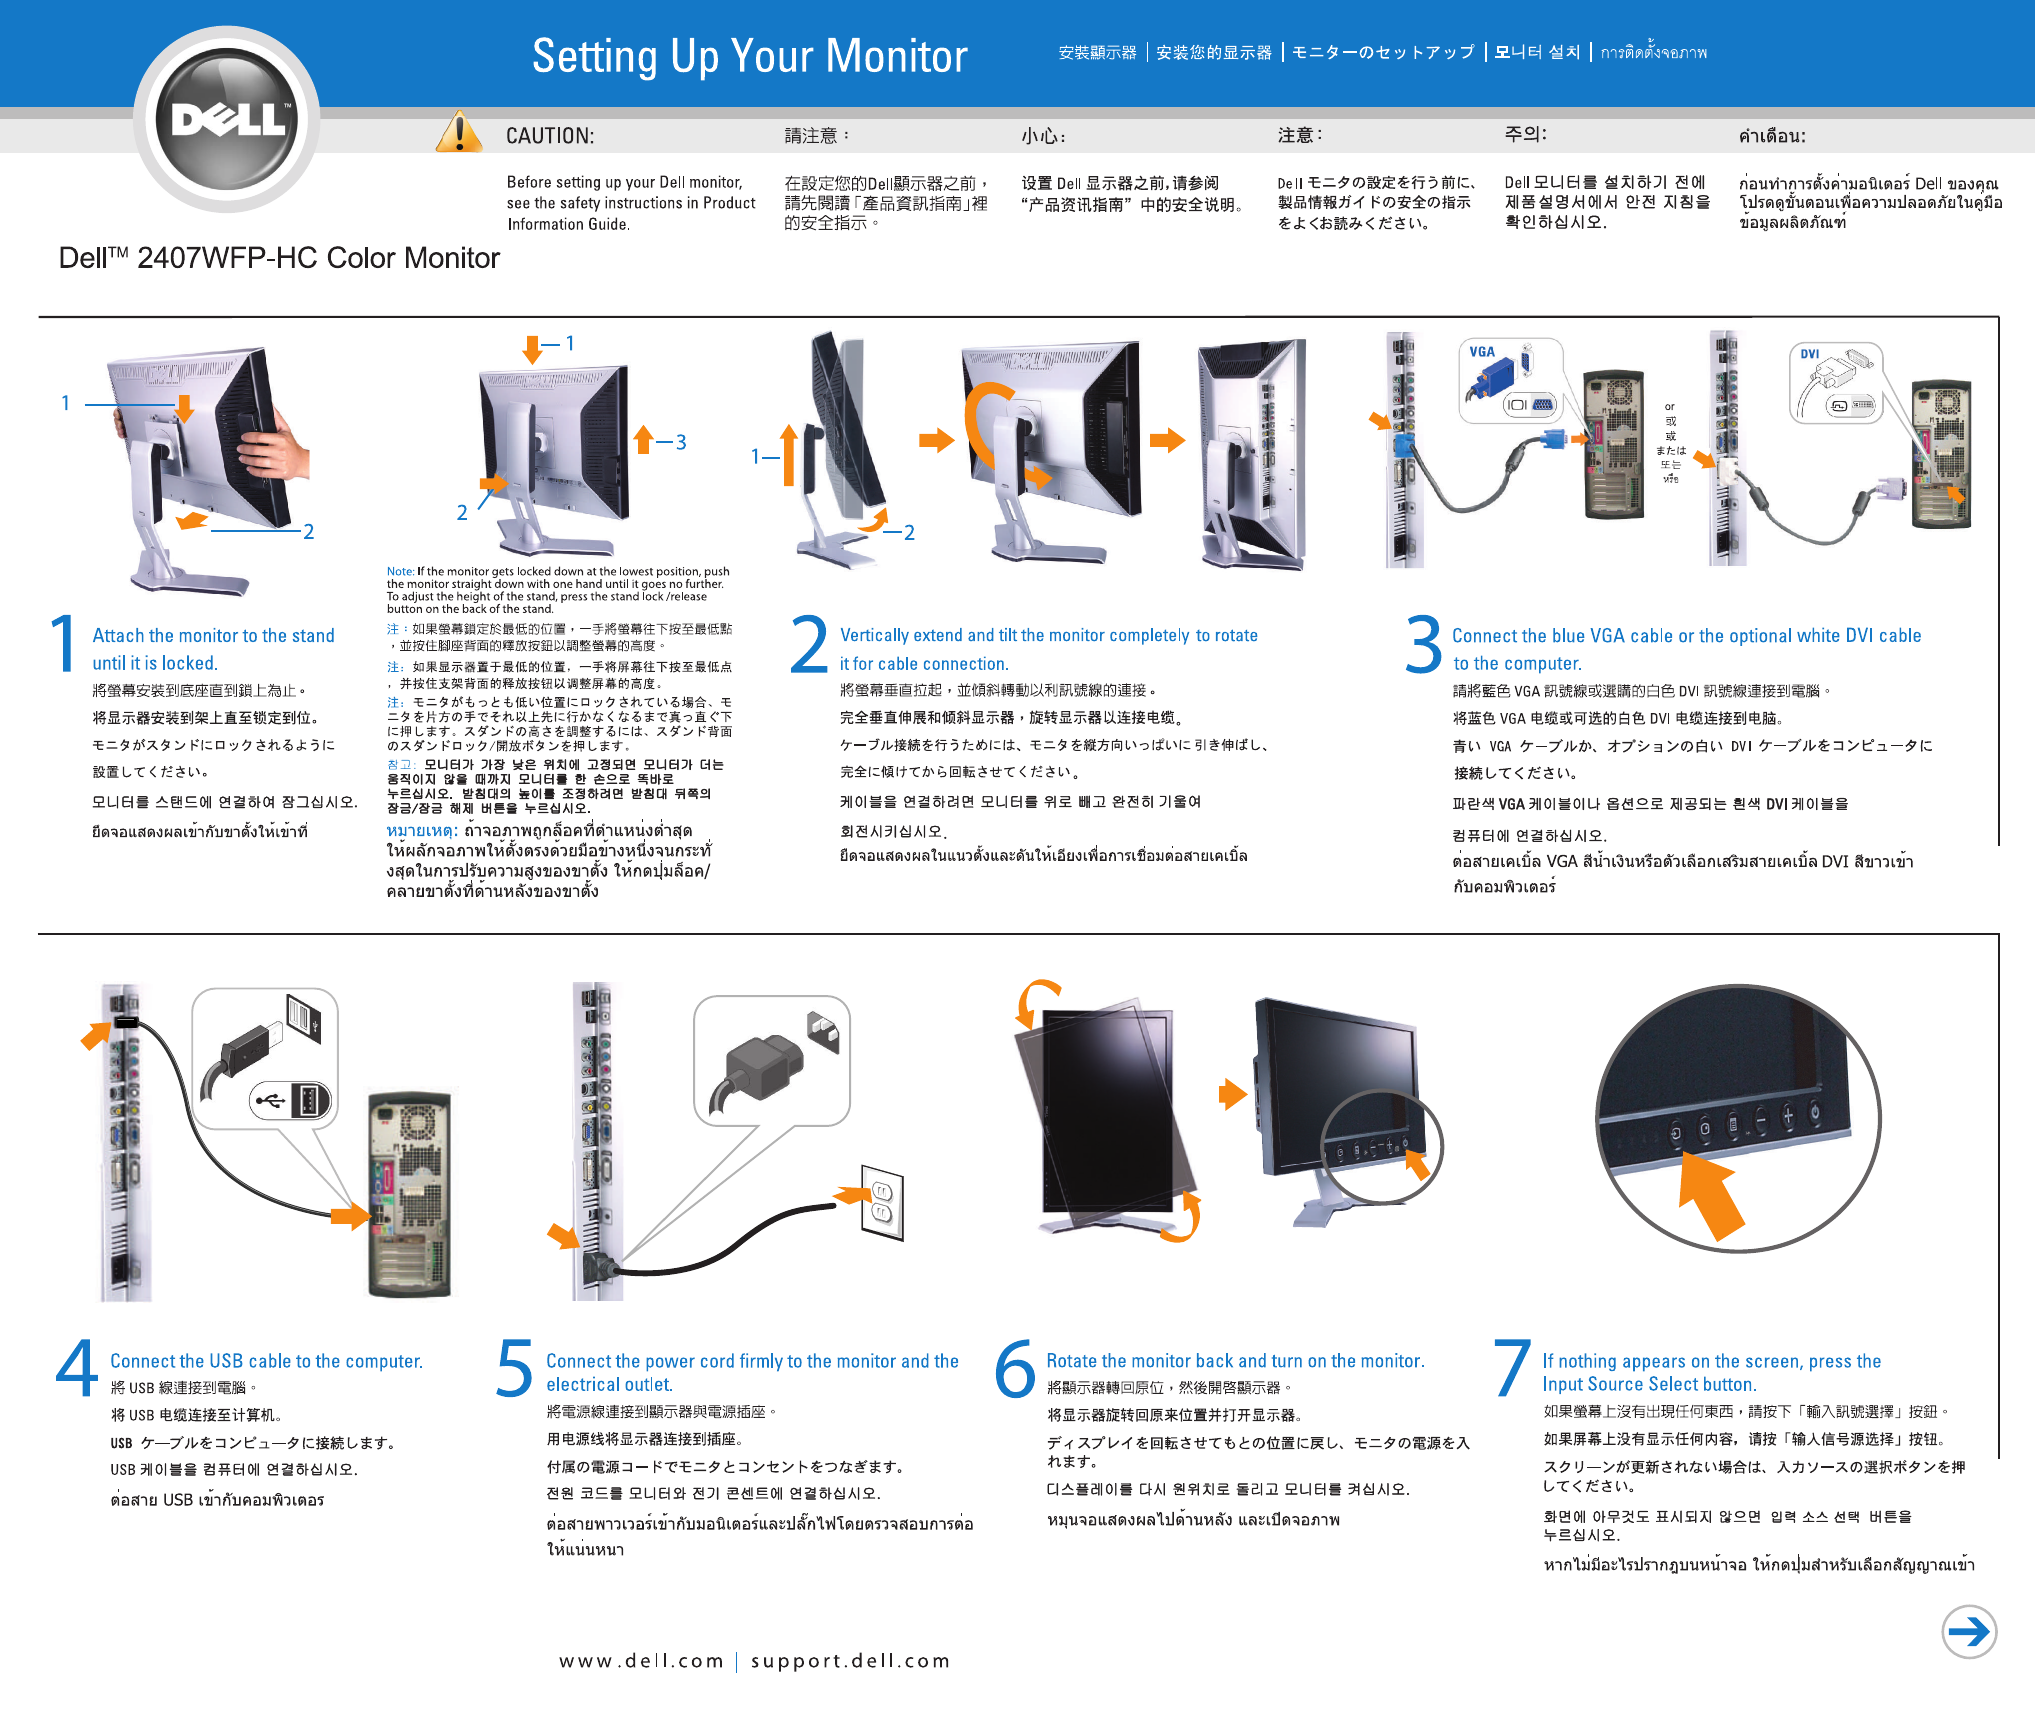 Page 1 of 2 - Dell Dell-2407wfp-hc 2407WFP-HC Monitor แผนผังการจัดเตรียม User Manual  - Setup Guide Th-th